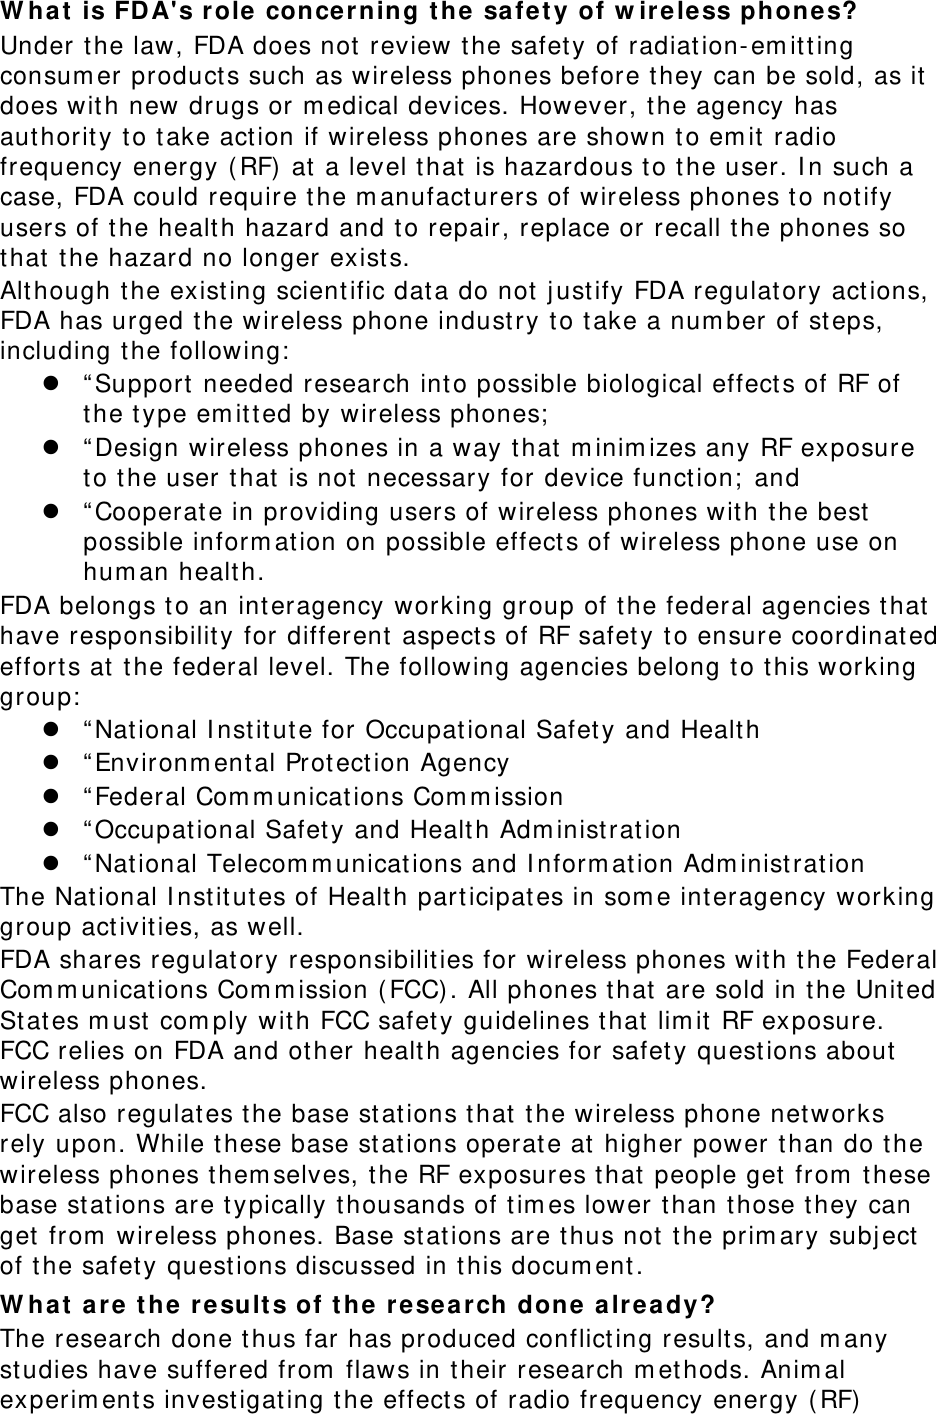 What is FDA&apos;s role concerning the safety of wireless phones? Under the law, FDA does not review the safety of radiation-emitting consumer products such as wireless phones before they can be sold, as it does with new drugs or medical devices. However, the agency has authority to take action if wireless phones are shown to emit radio frequency energy (RF) at a level that is hazardous to the user. In such a case, FDA could require the manufacturers of wireless phones to notify users of the health hazard and to repair, replace or recall the phones so that the hazard no longer exists. Although the existing scientific data do not justify FDA regulatory actions, FDA has urged the wireless phone industry to take a number of steps, including the following: z “Support needed research into possible biological effects of RF of the type emitted by wireless phones; z “Design wireless phones in a way that minimizes any RF exposure to the user that is not necessary for device function; and z “Cooperate in providing users of wireless phones with the best possible information on possible effects of wireless phone use on human health. FDA belongs to an interagency working group of the federal agencies that have responsibility for different aspects of RF safety to ensure coordinated efforts at the federal level. The following agencies belong to this working group: z “National Institute for Occupational Safety and Health z “Environmental Protection Agency z “Federal Communications Commission z “Occupational Safety and Health Administration z “National Telecommunications and Information Administration The National Institutes of Health participates in some interagency working group activities, as well. FDA shares regulatory responsibilities for wireless phones with the Federal Communications Commission (FCC). All phones that are sold in the United States must comply with FCC safety guidelines that limit RF exposure. FCC relies on FDA and other health agencies for safety questions about wireless phones. FCC also regulates the base stations that the wireless phone networks rely upon. While these base stations operate at higher power than do the wireless phones themselves, the RF exposures that people get from these base stations are typically thousands of times lower than those they can get from wireless phones. Base stations are thus not the primary subject of the safety questions discussed in this document. What are the results of the research done already? The research done thus far has produced conflicting results, and many studies have suffered from flaws in their research methods. Animal experiments investigating the effects of radio frequency energy (RF) 